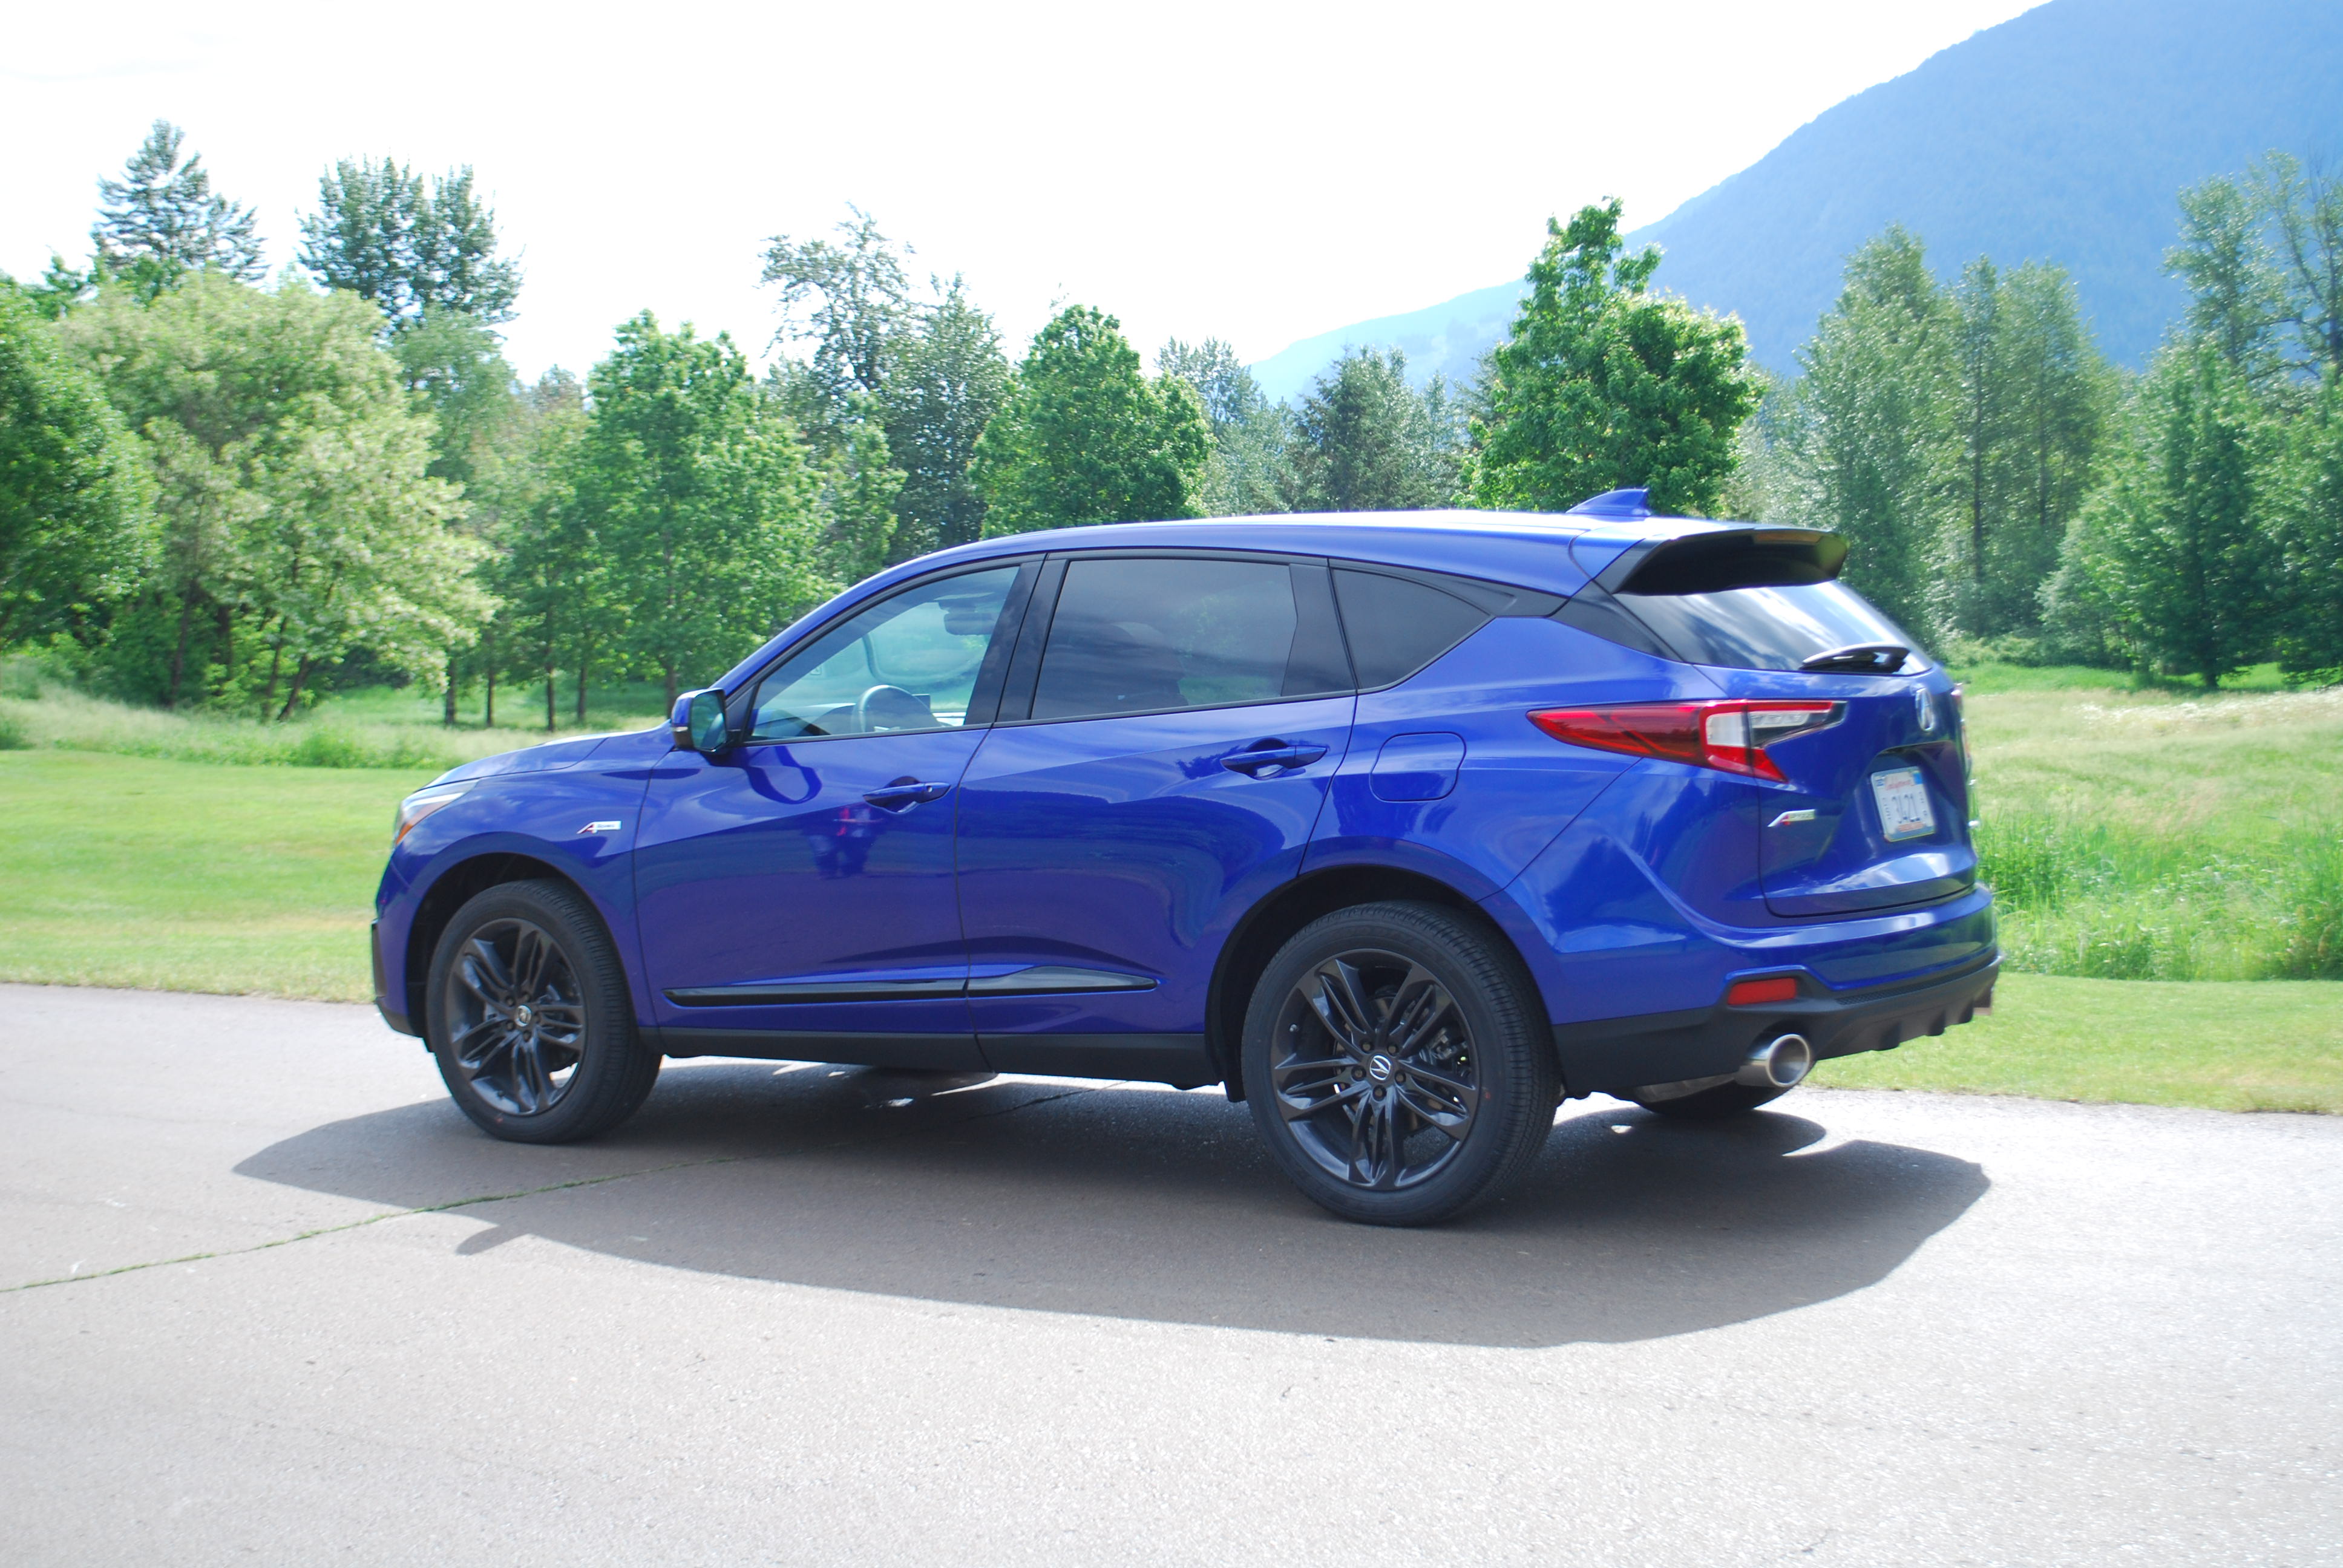 Acura RDX exterior restyling